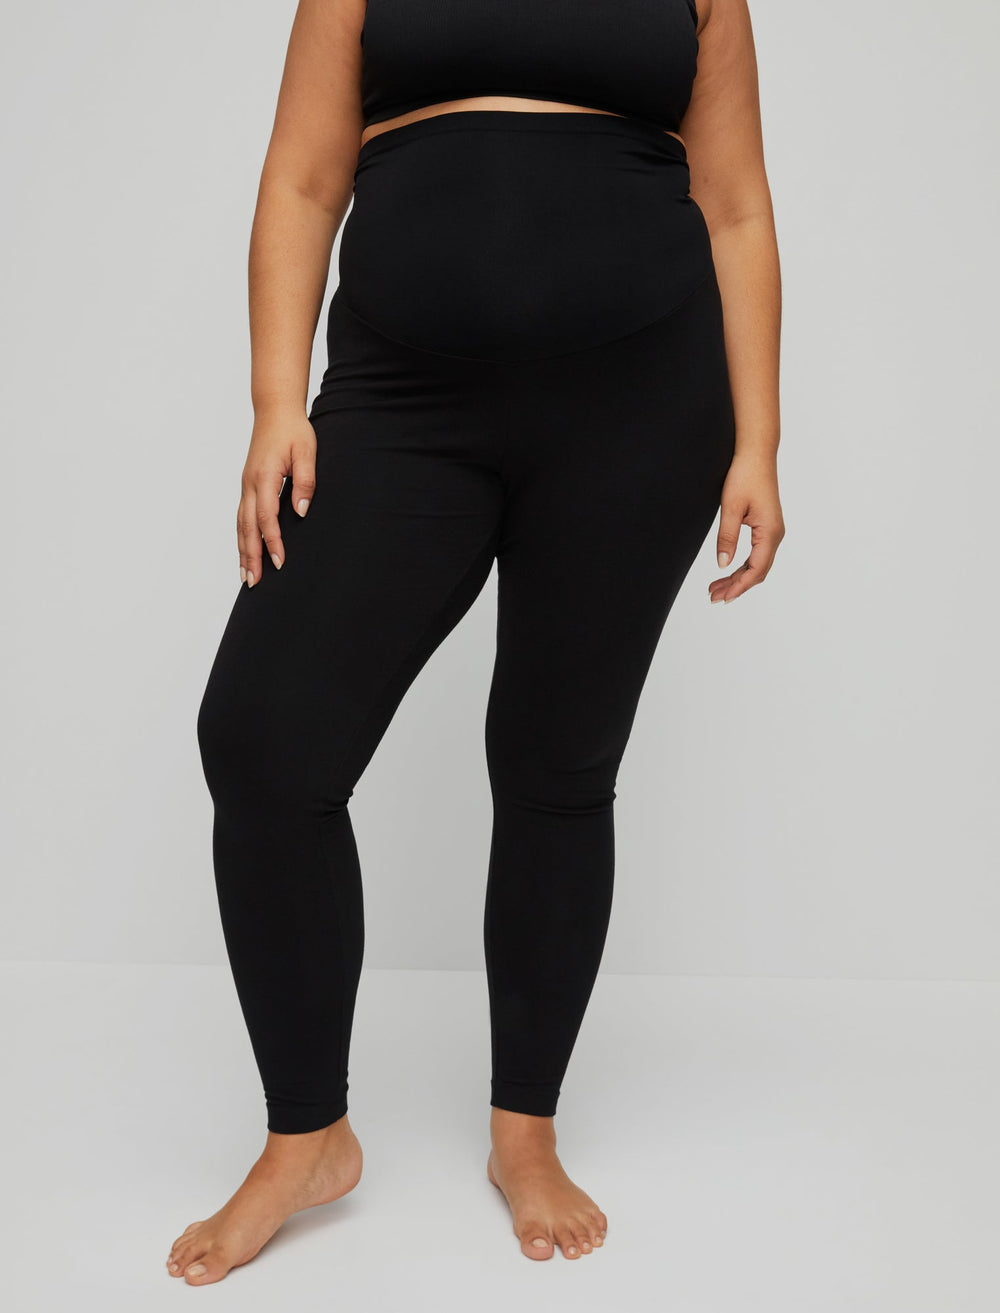 5 Ways To Style Leggings (Plus-Size Edition) - The Mom Edit